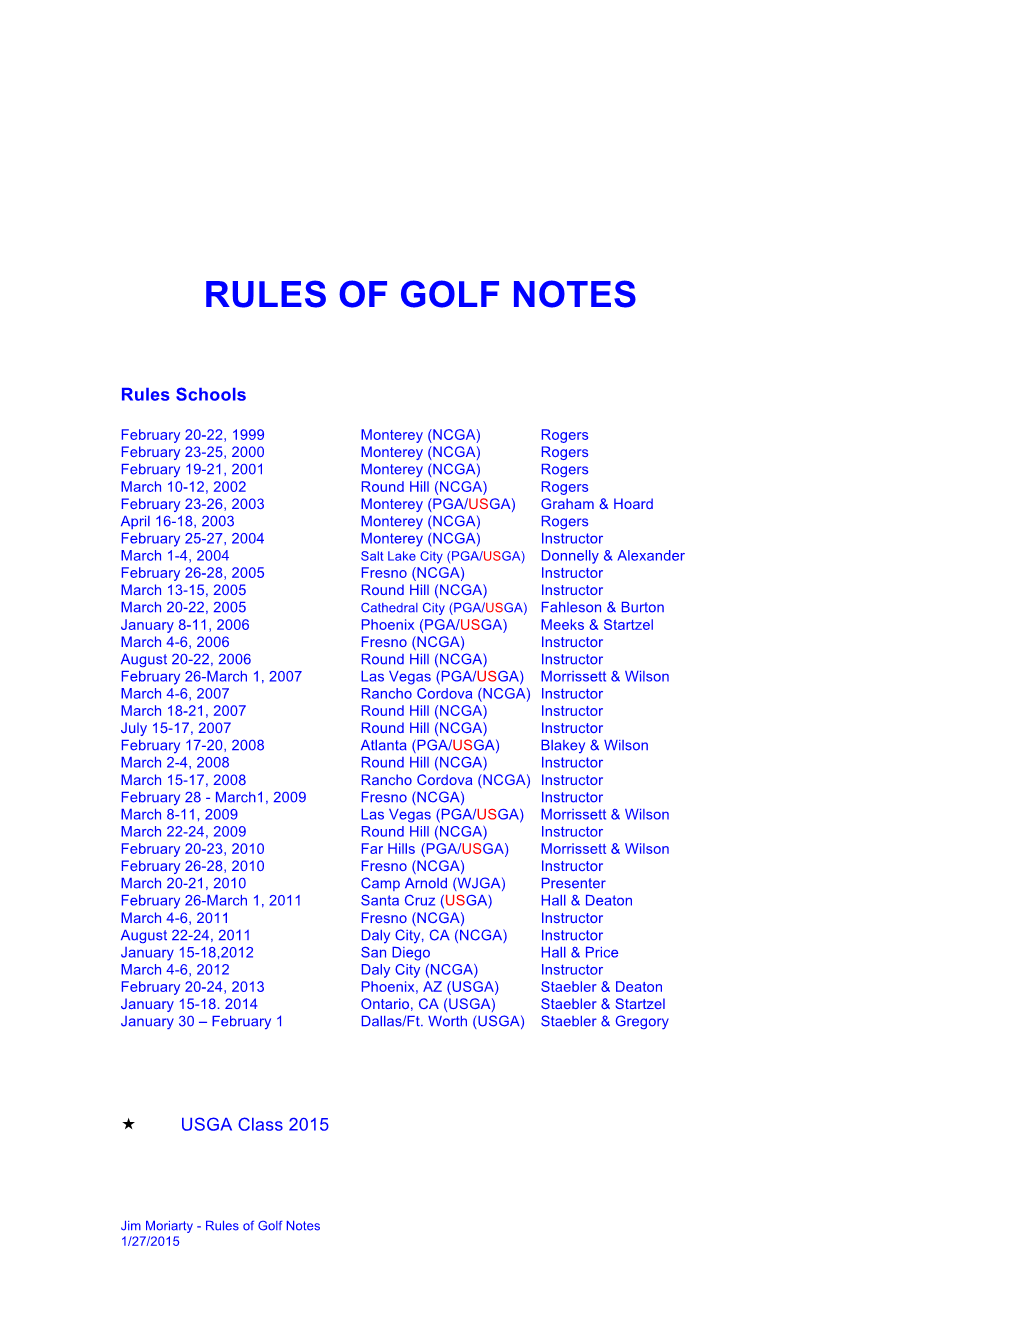 Rules of Golf Notes 2015